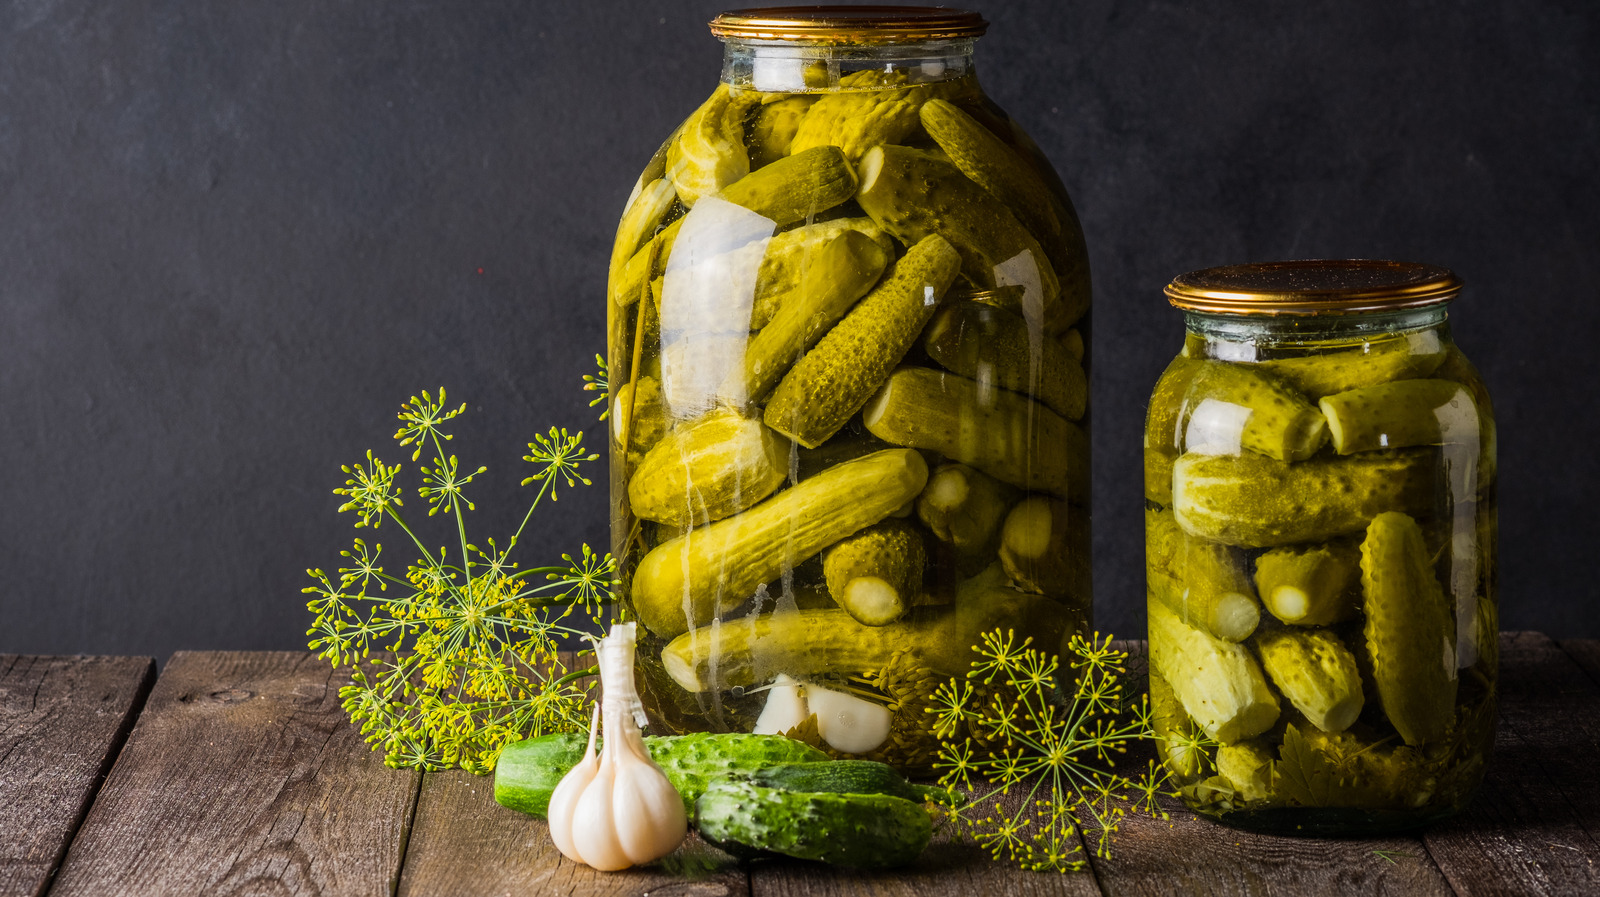 Making pickles for my GIANT pickle jar! Come see this bad boy in actio